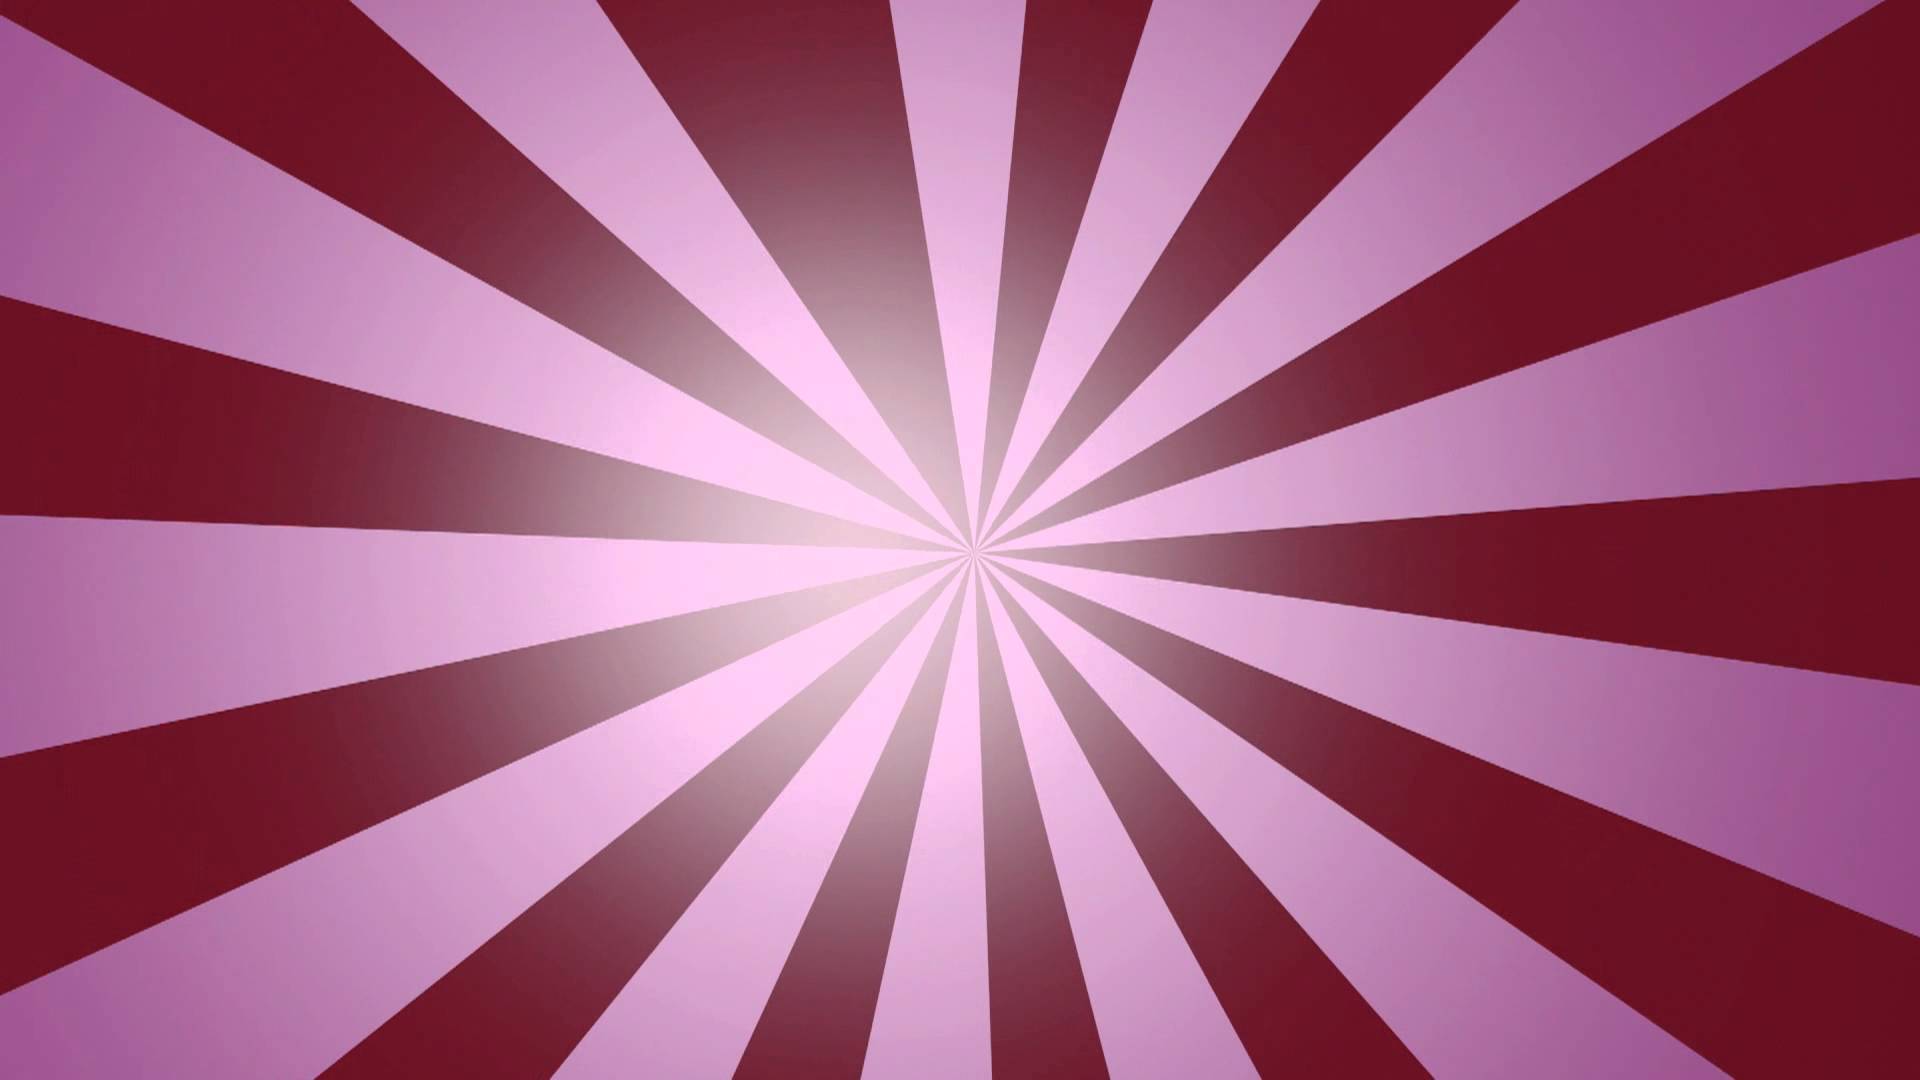 Party star - loop HD animated background #03 - YouTube